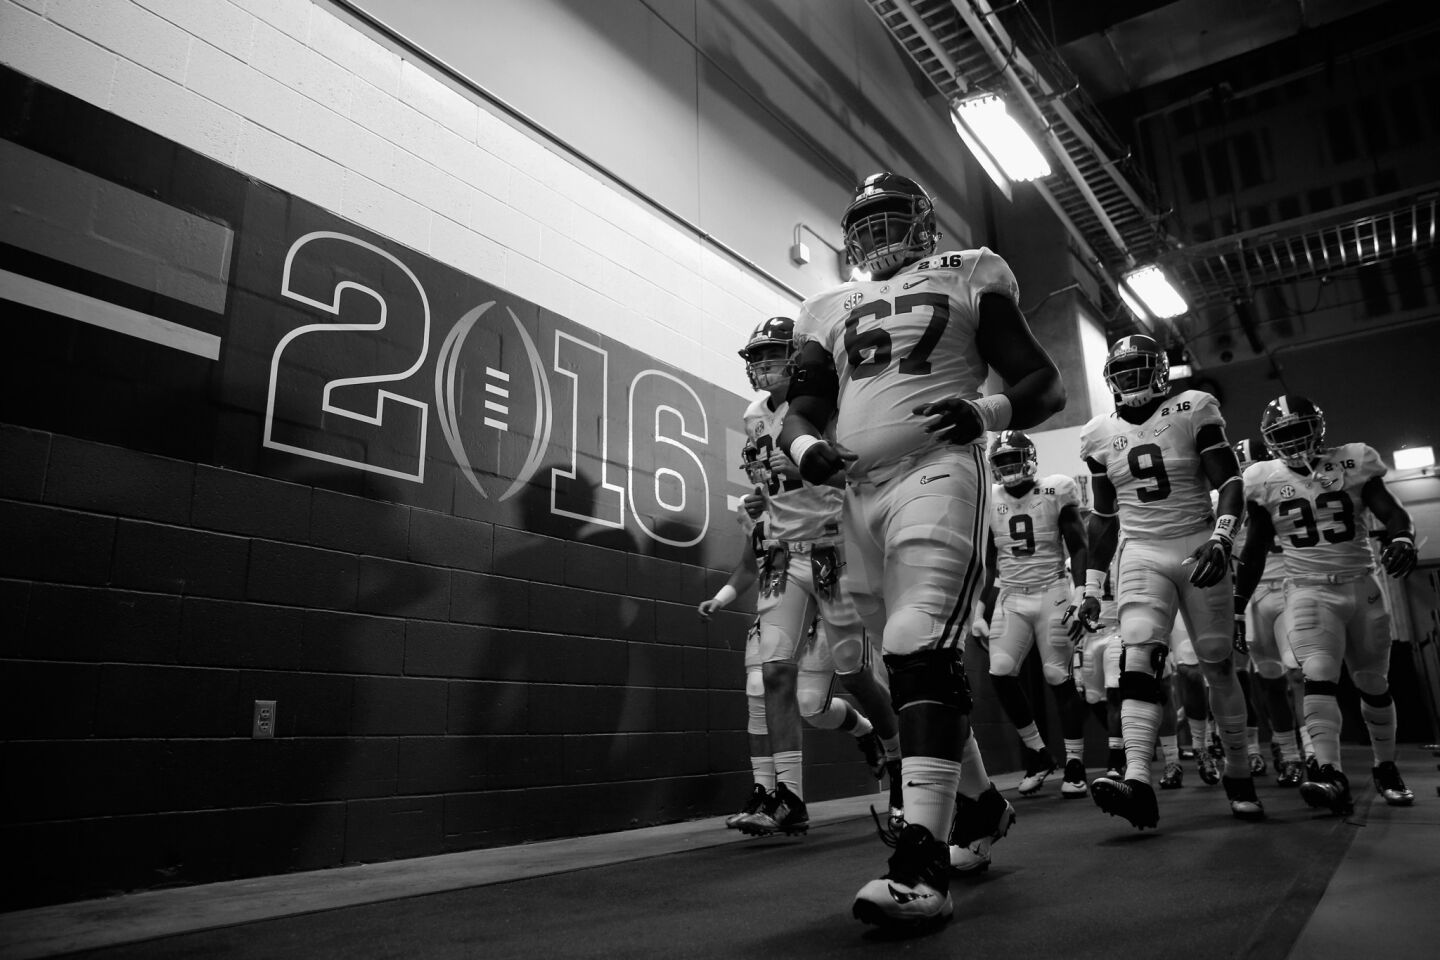 Alabama offensive lineman Josh Casher (67) leads the team onto the field after halftime.